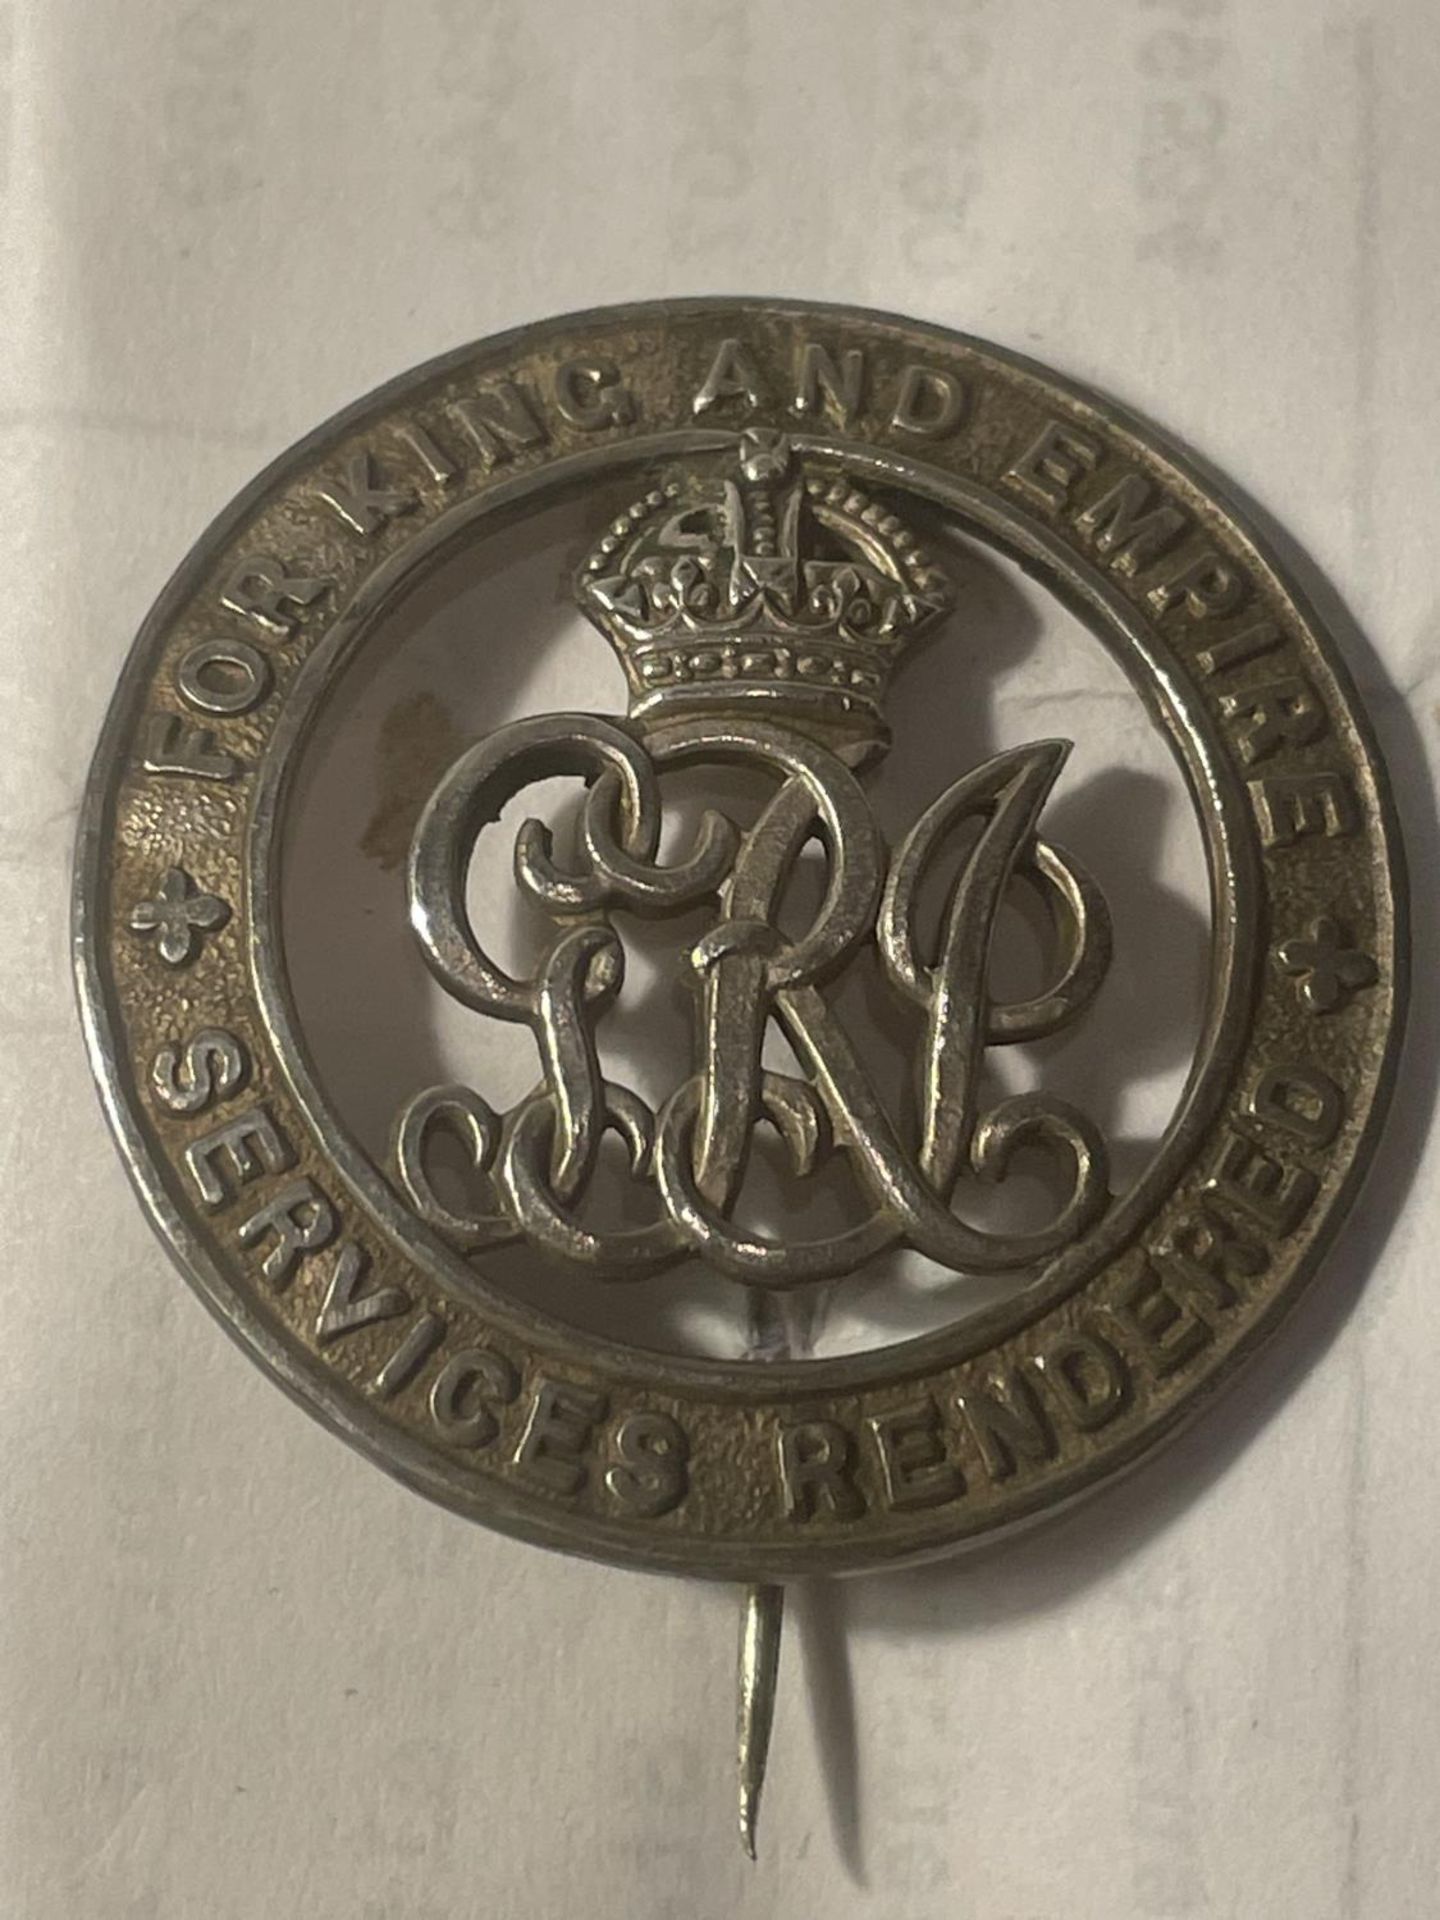 A FOR KING AND EMPIRE SERVICES RENDERED PIN BADGE - Image 2 of 2